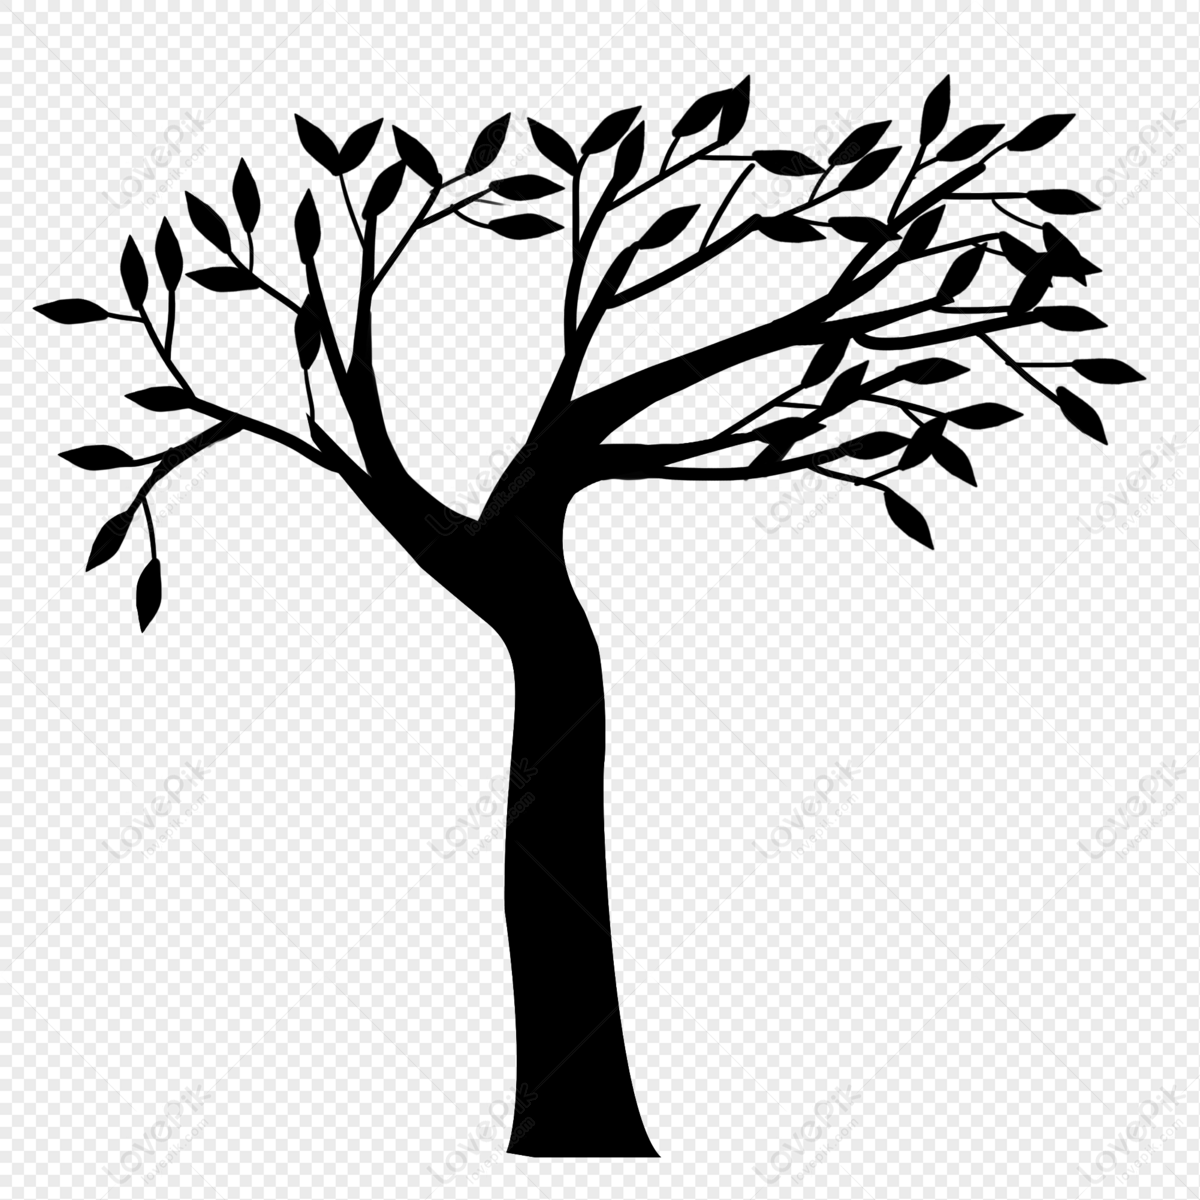 Big tree silhouette, tree, material, tree outline png image free download